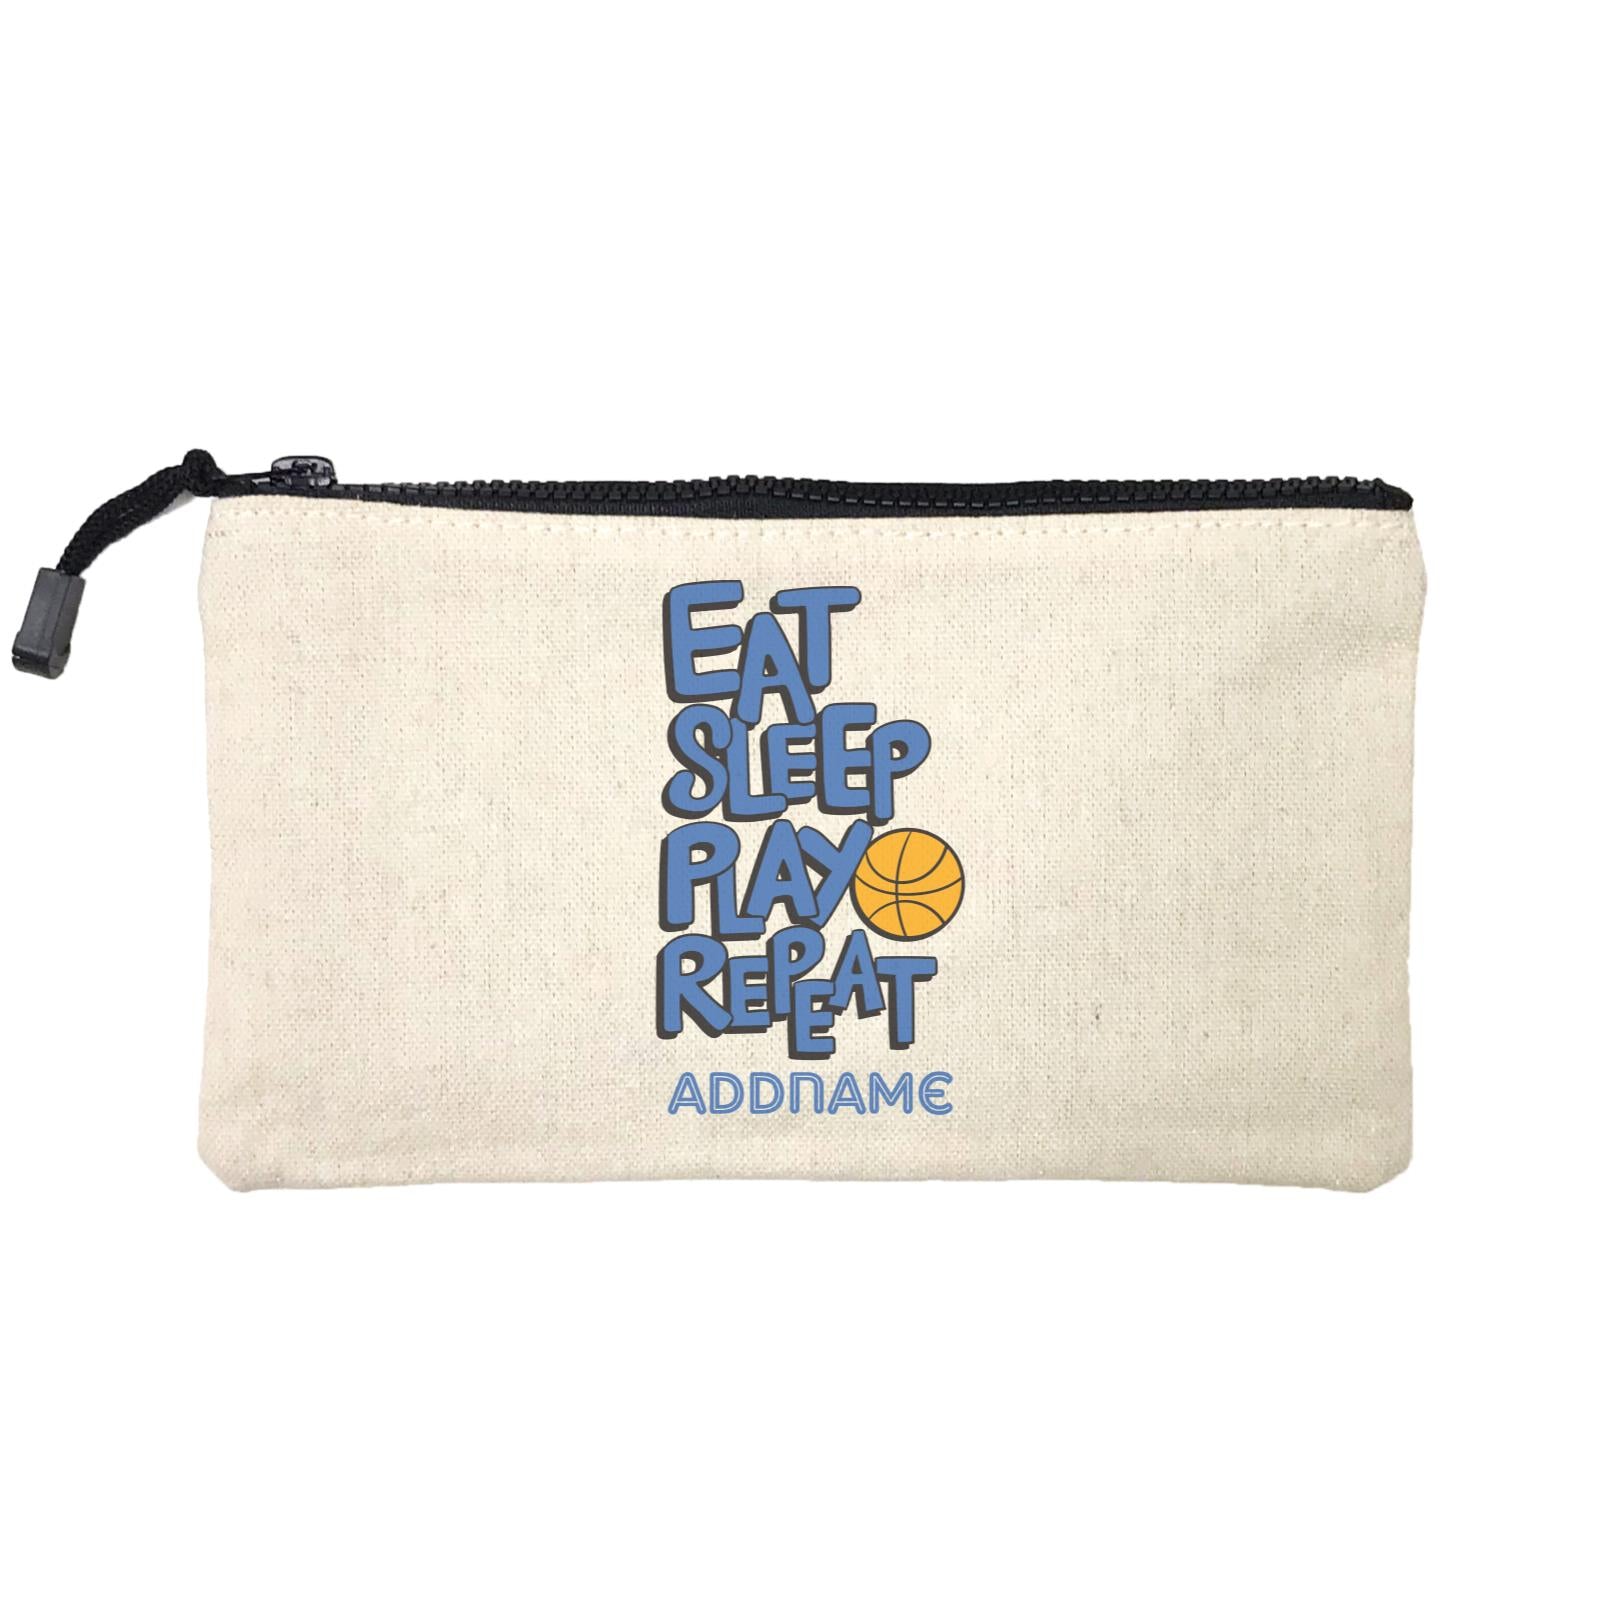 Cool Cute Words Eat Sleep Play Repeat Addname Mini Accessories Stationery Pouch